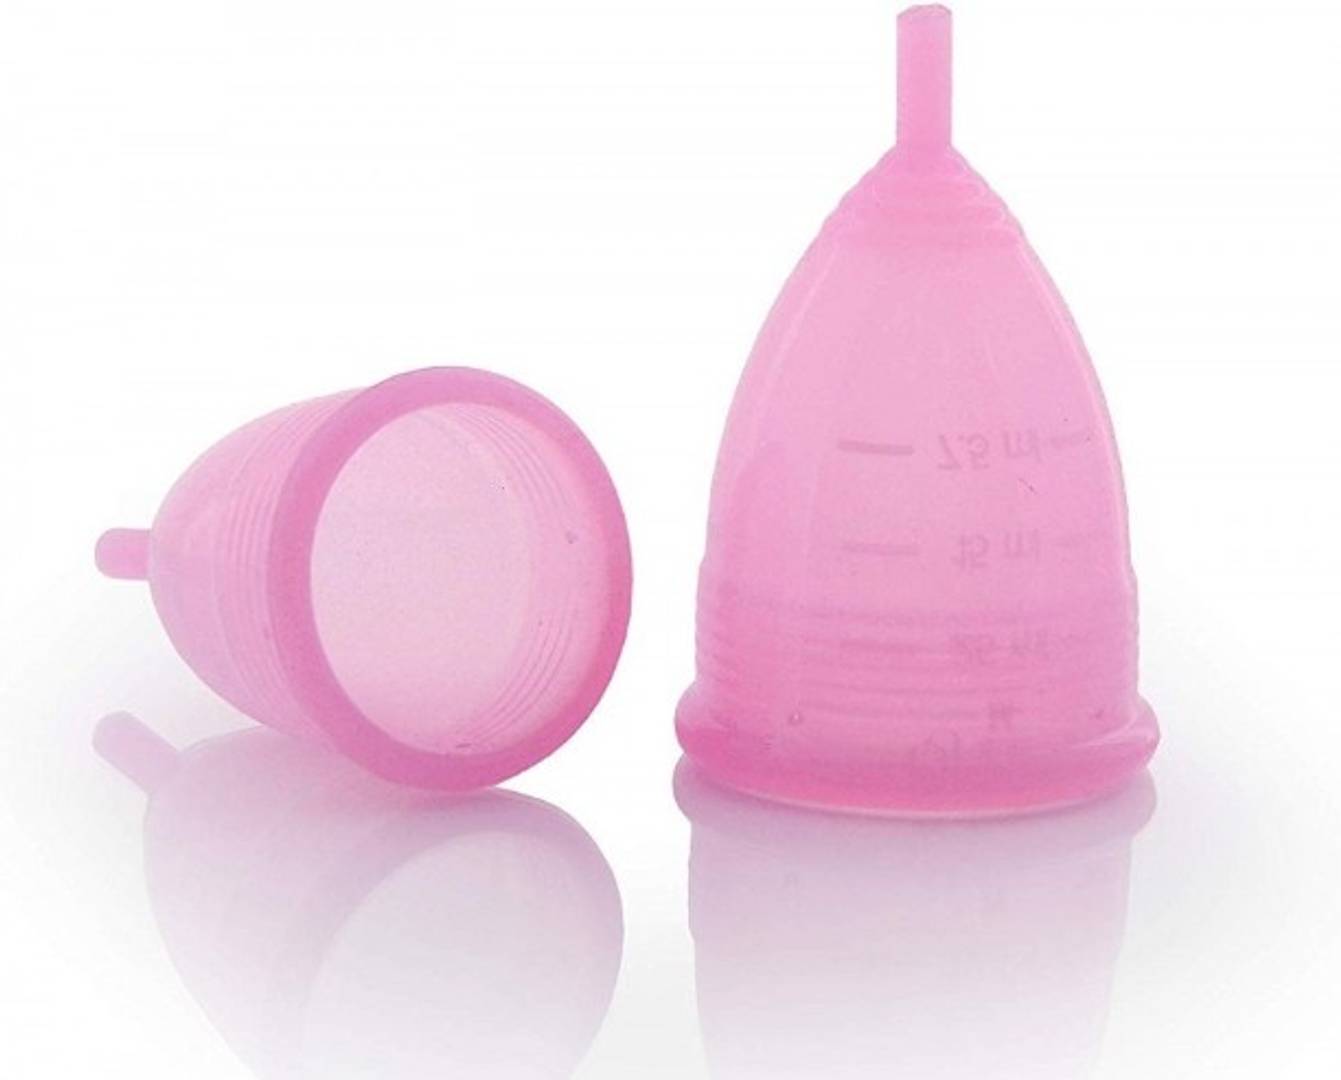 Care-Cup The Menstrual Cup - CareWere